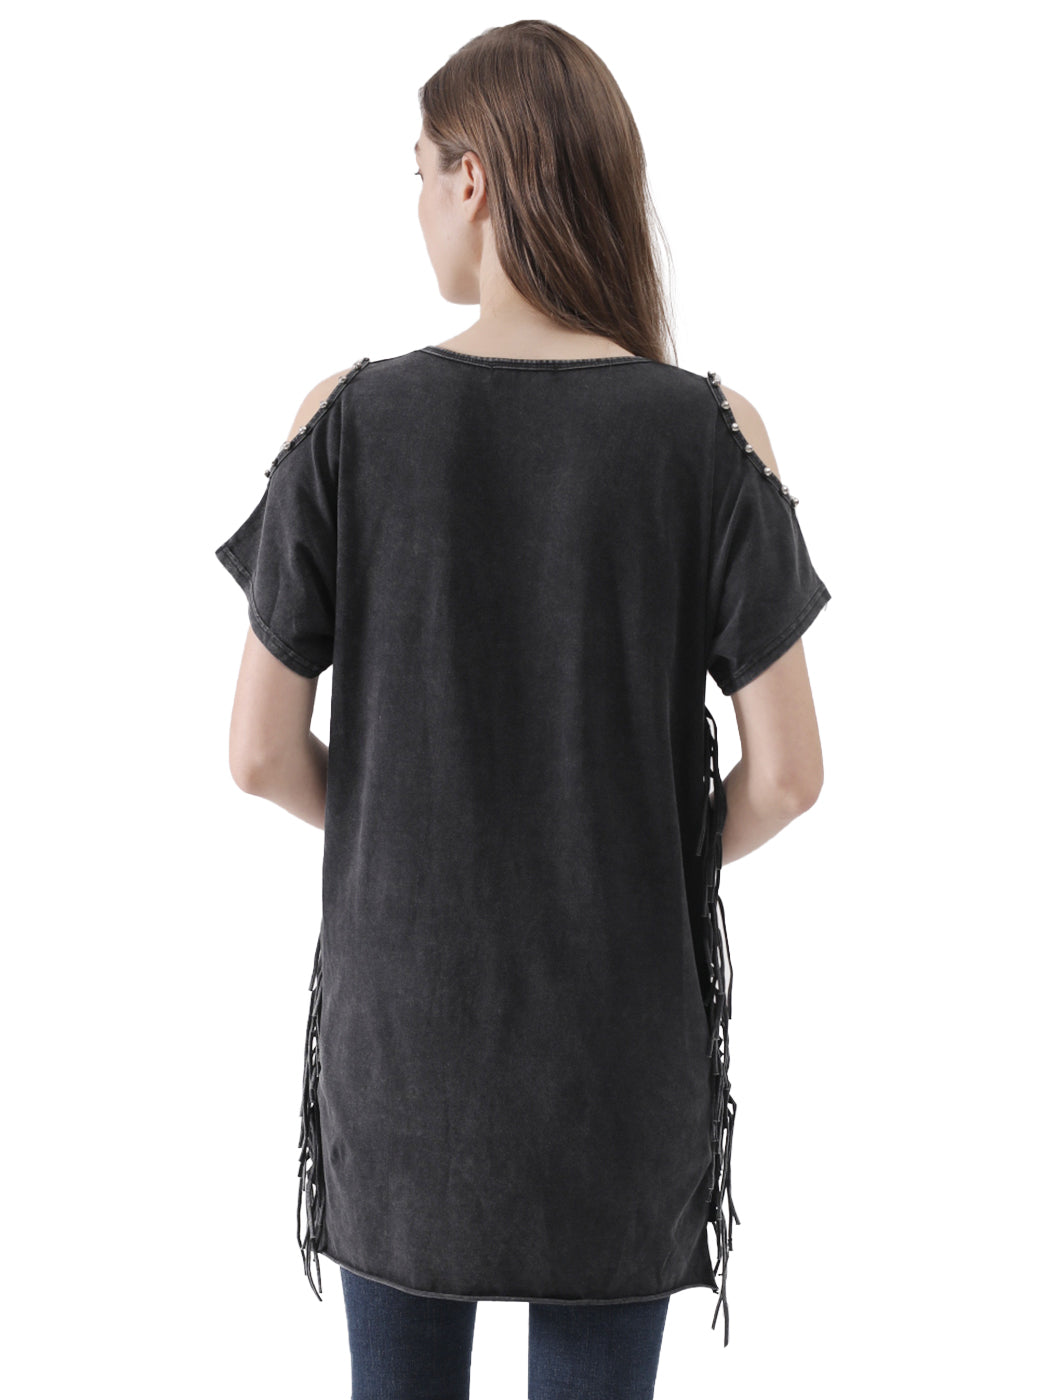 Womens Short Sleeve Cold Shoulder Ripped Distressed Top T-Shirt Blouse